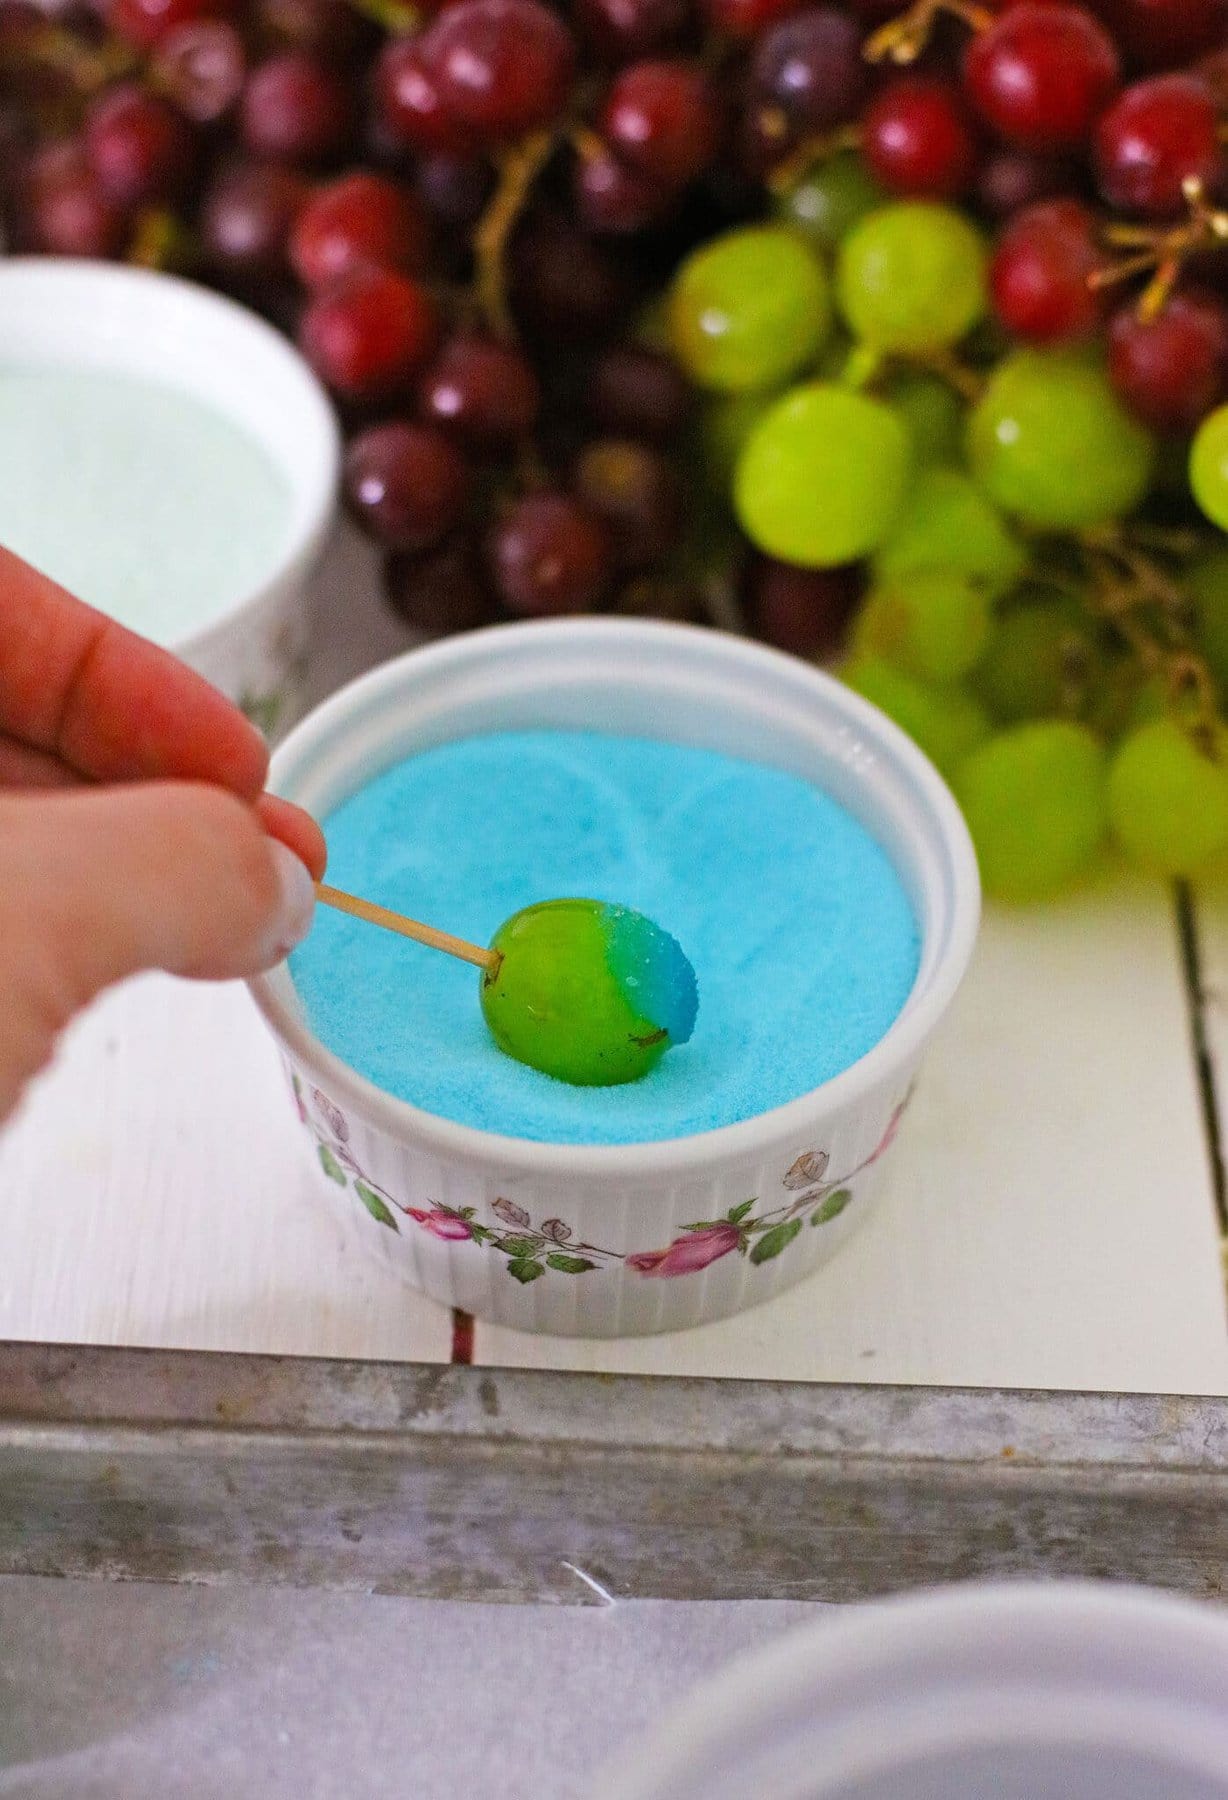 Dipping the grapes in jello.